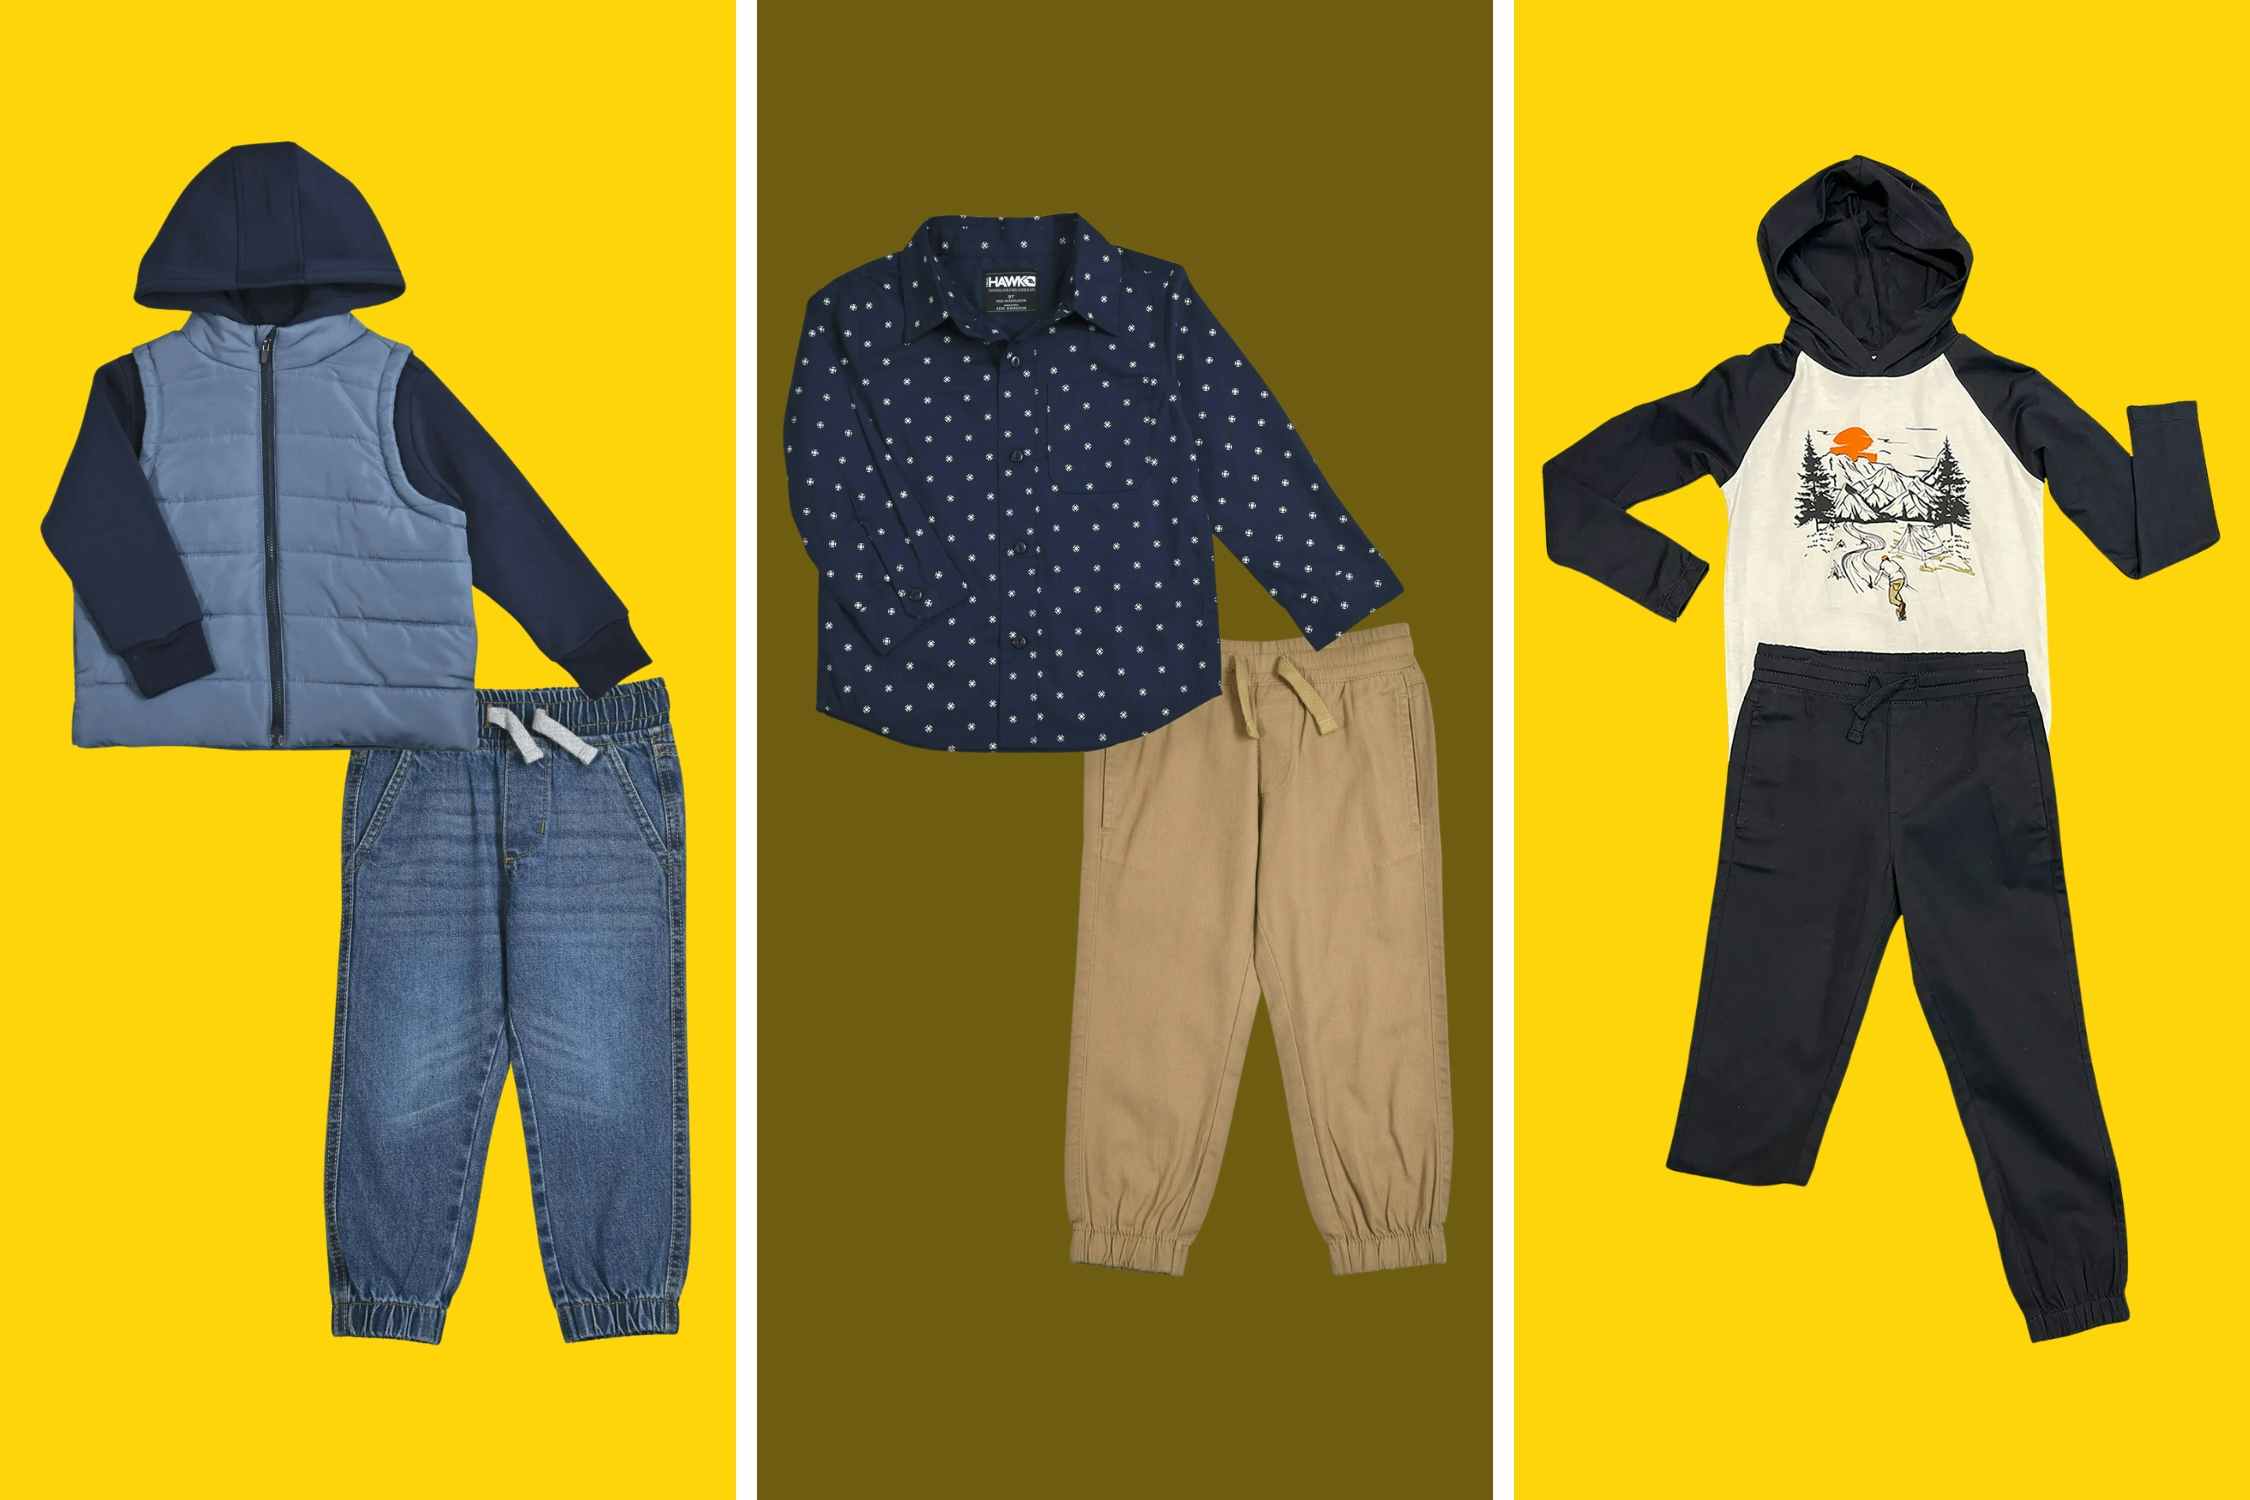 Children's Clearance at Walmart: $6 Outfit, $7 Jogger Set, $8 Hoodie, and More